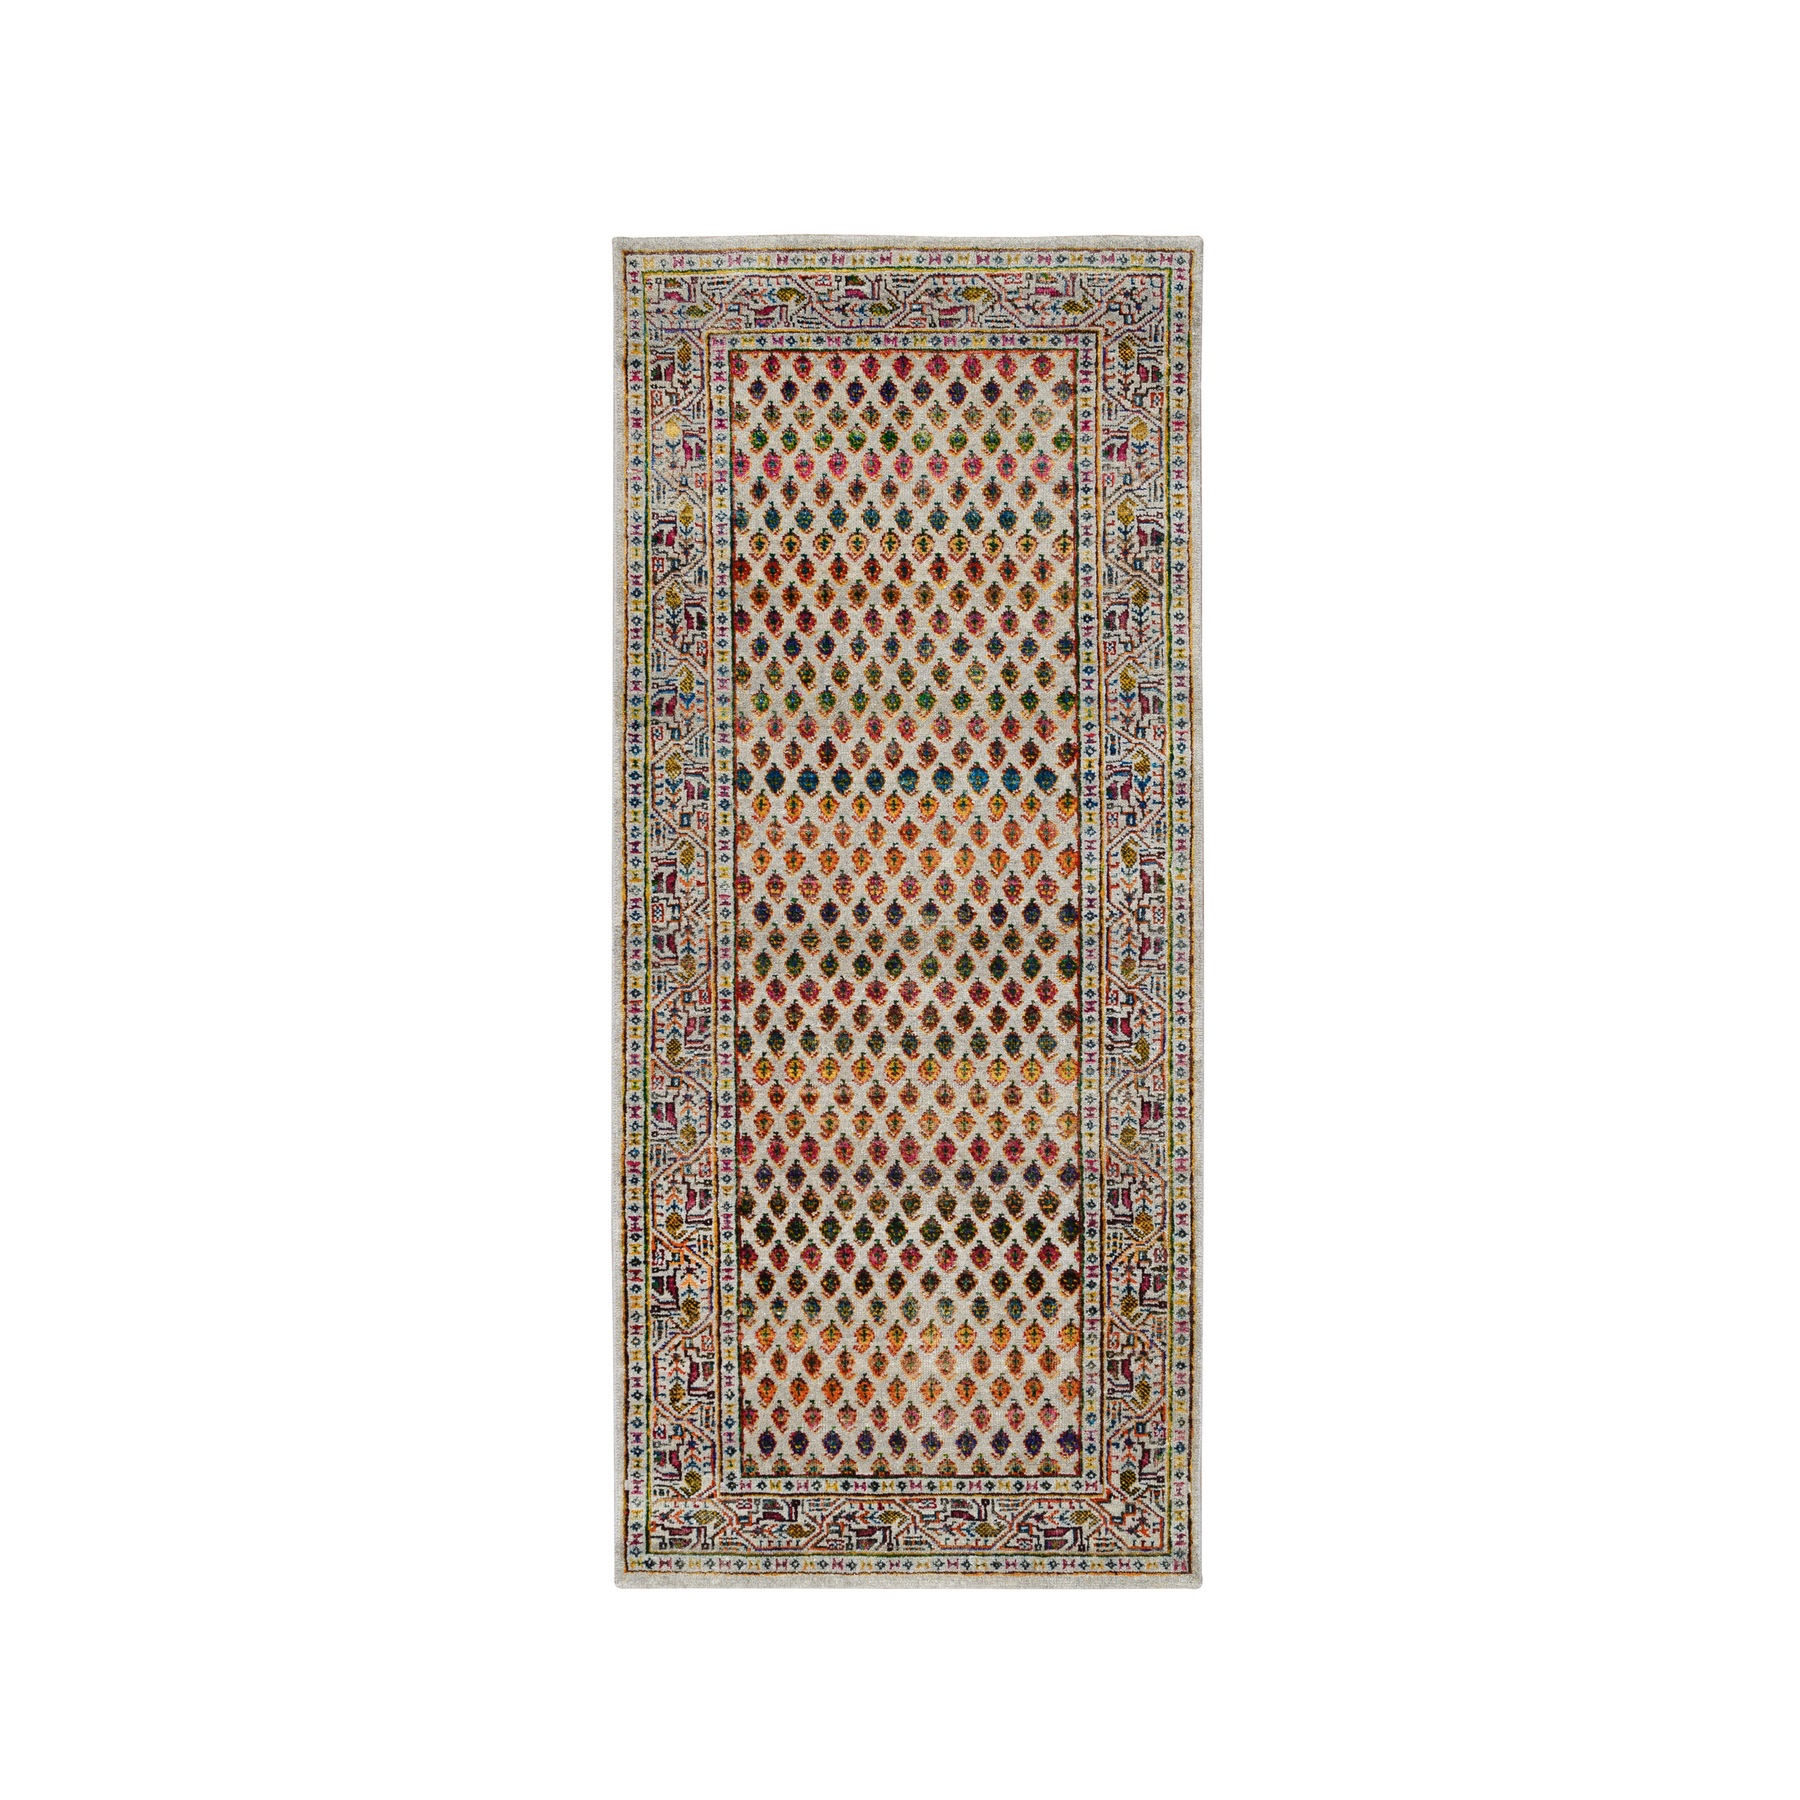 2'6"x6' Sarouk Mir Inspired With Repetitive Boteh Design Colorful Wool And Sari Silk Hand Woven Beige Oriental Runner Rug 